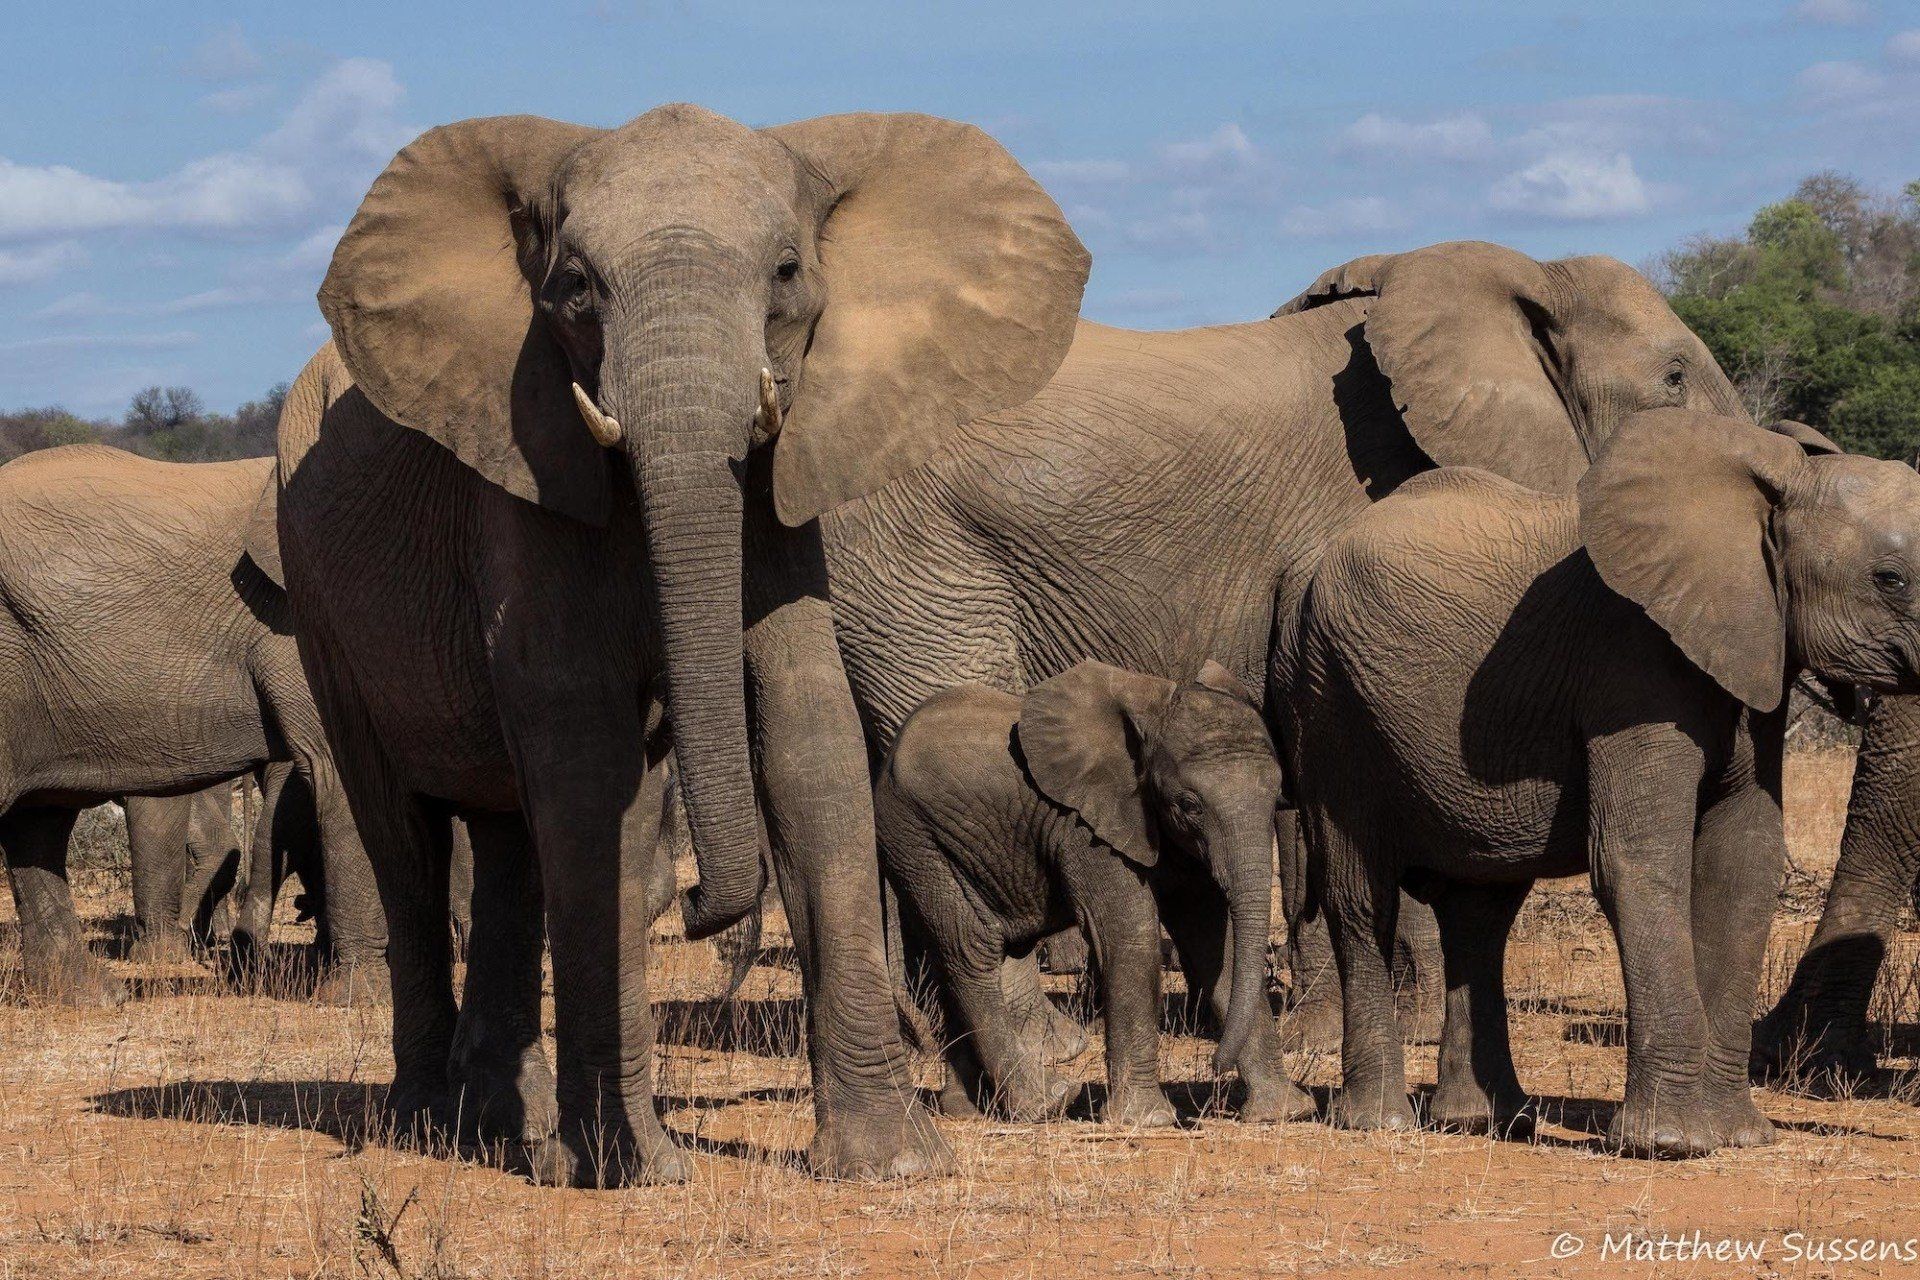 a herd of elephants standing next to each other in a field